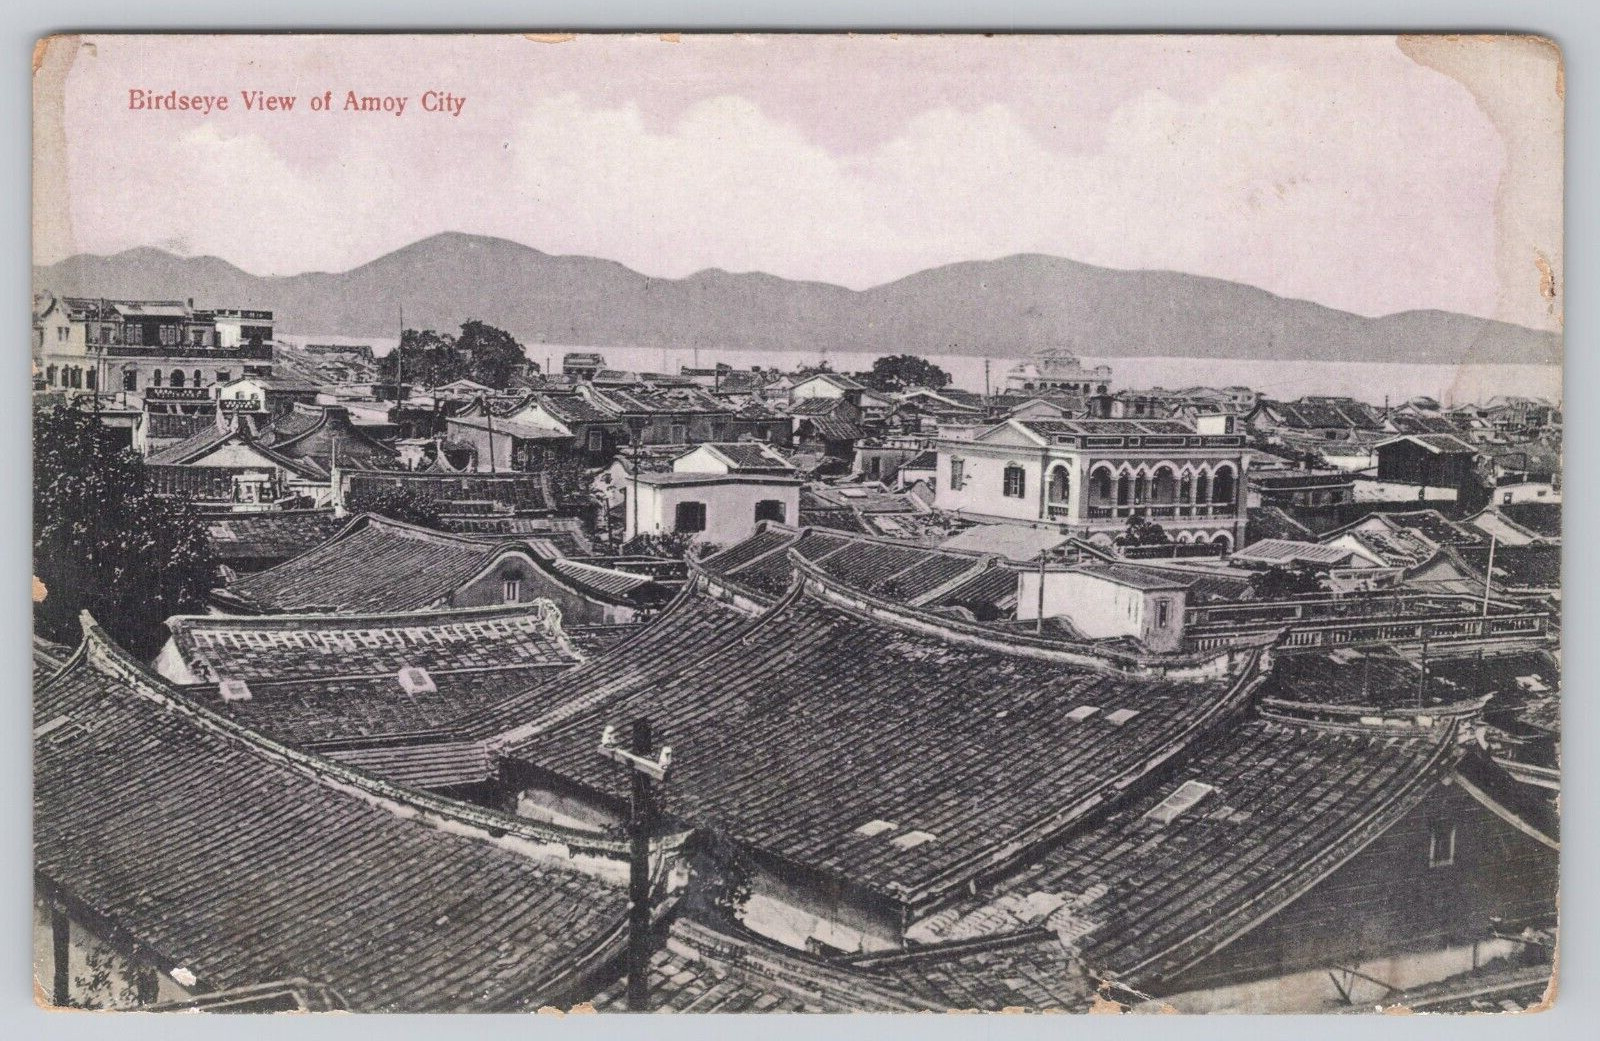 Vtg Post Card Birdseye View of Amoy City, China Photo taken by Mee Cheung D30